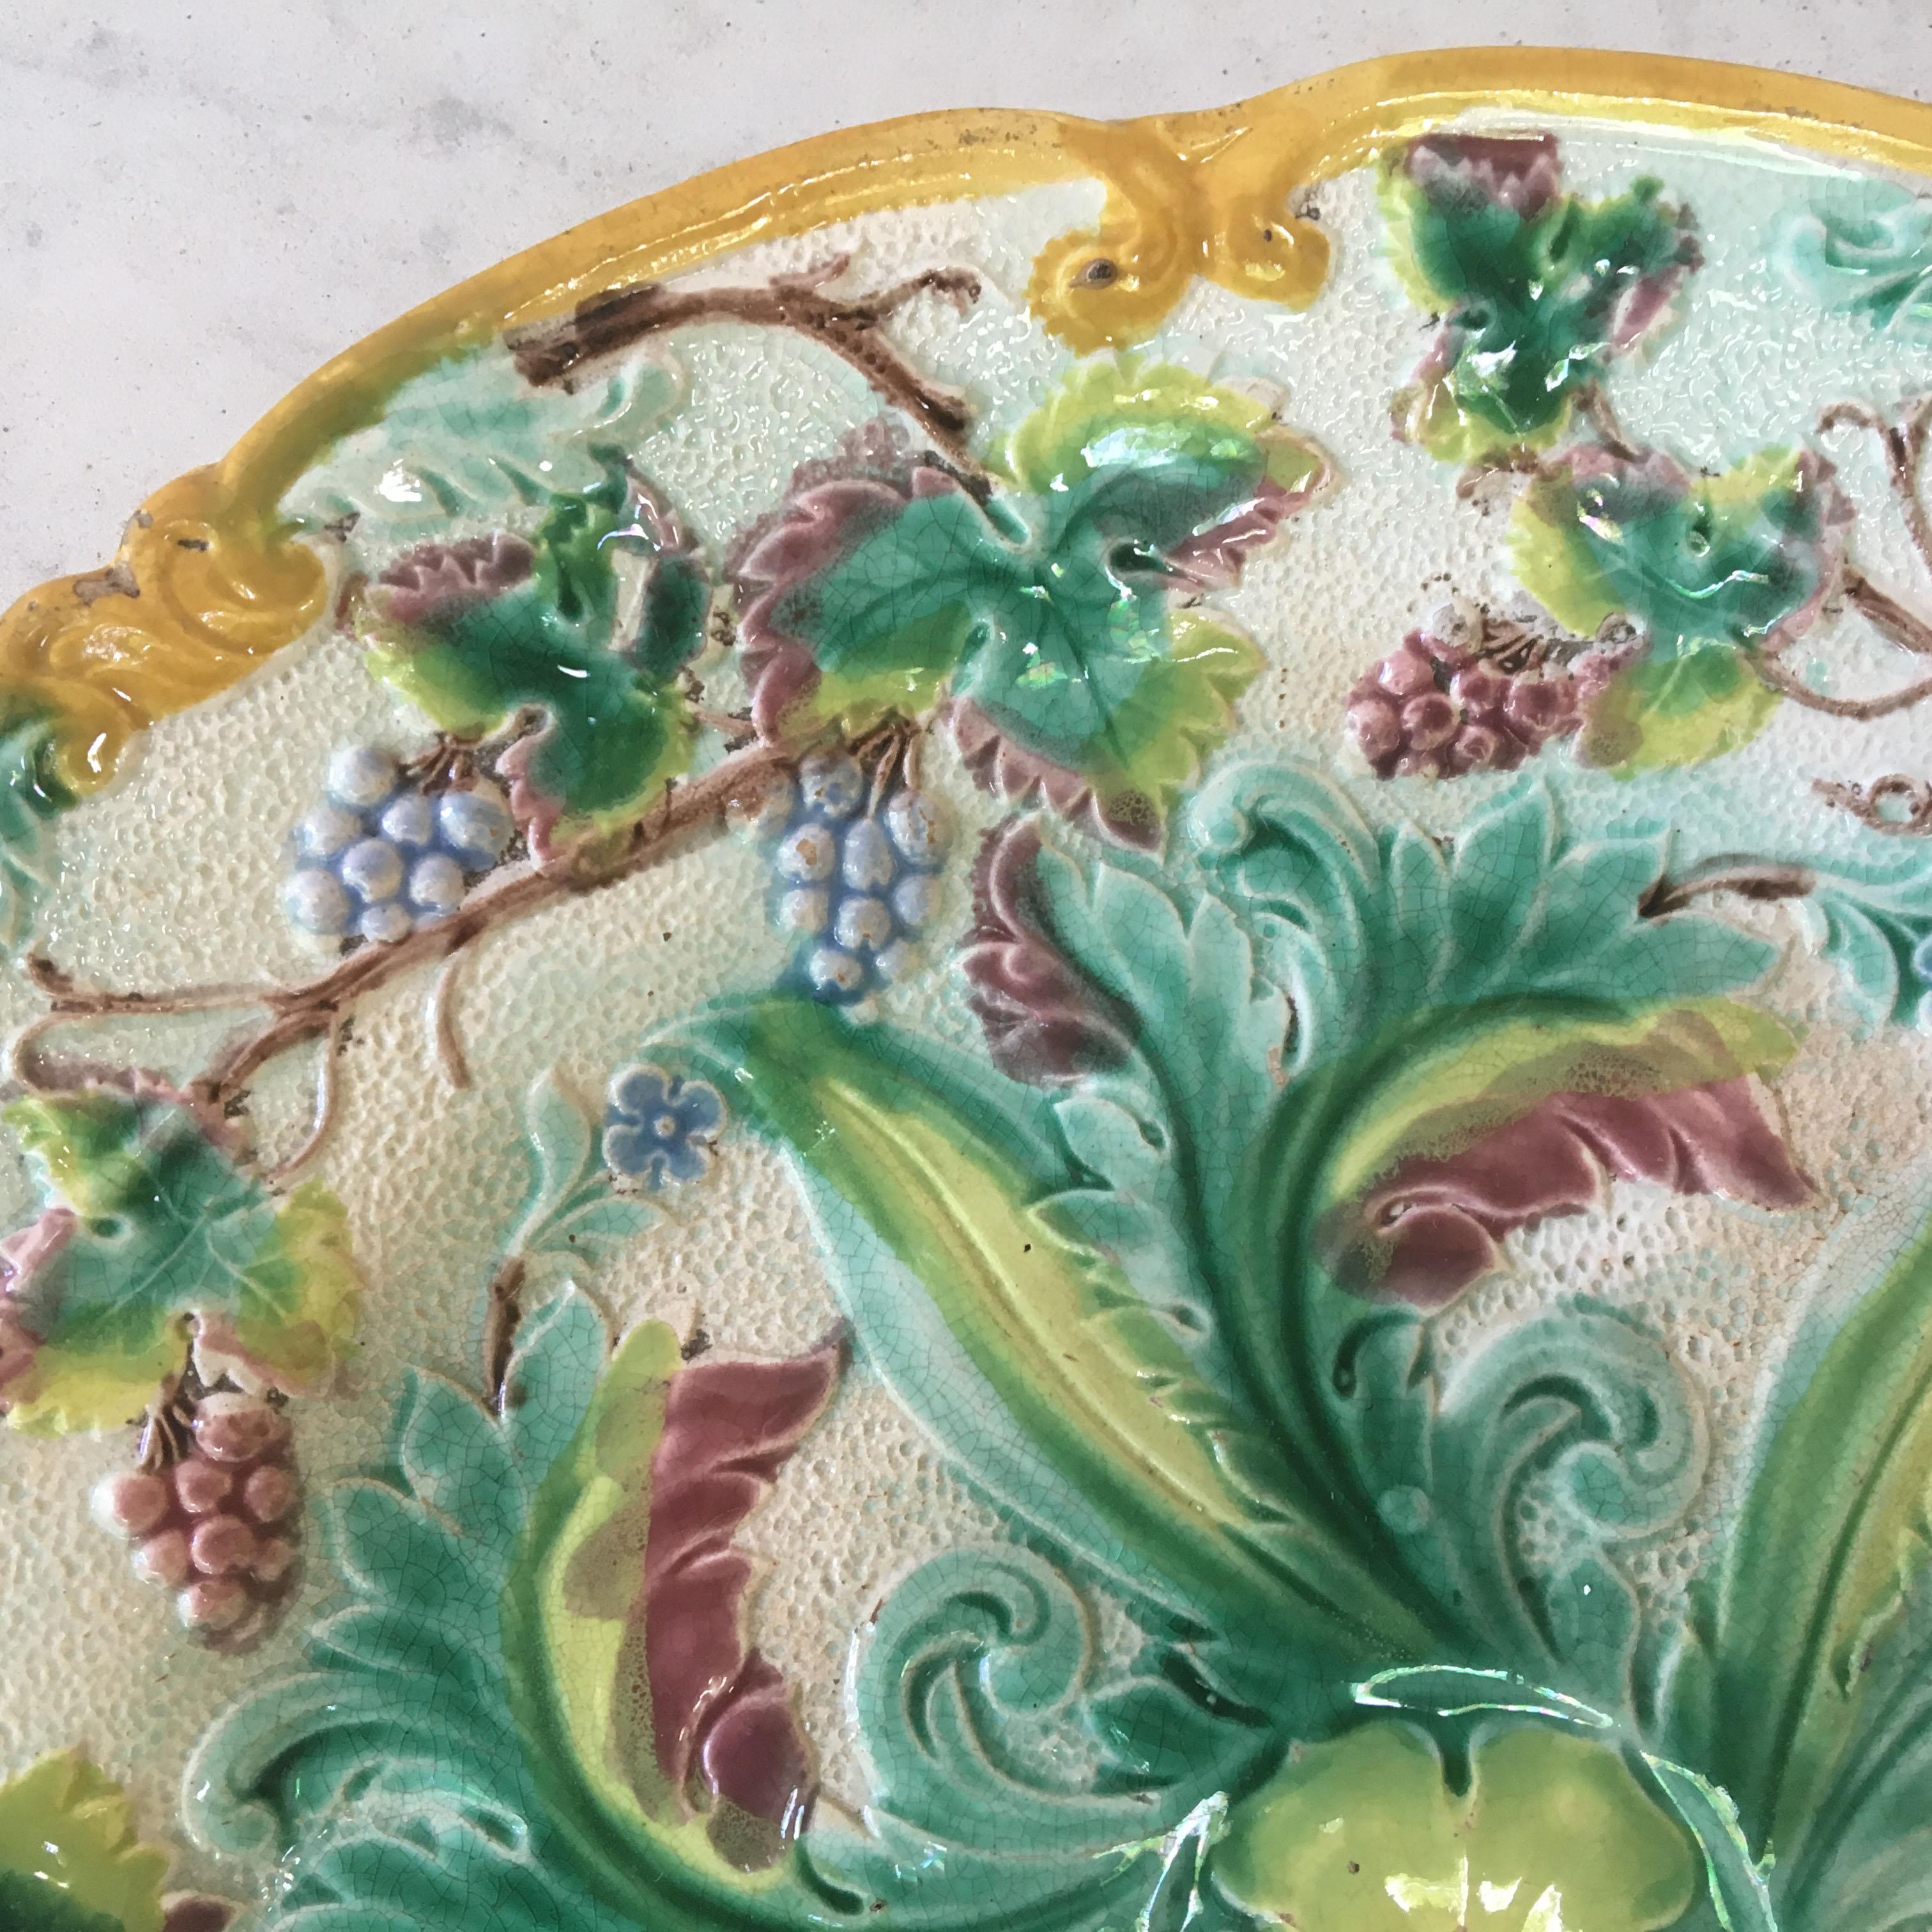 Fine English Majolica plate with grapes and acanthis leaves on the centre, yellow border, circa 1880.